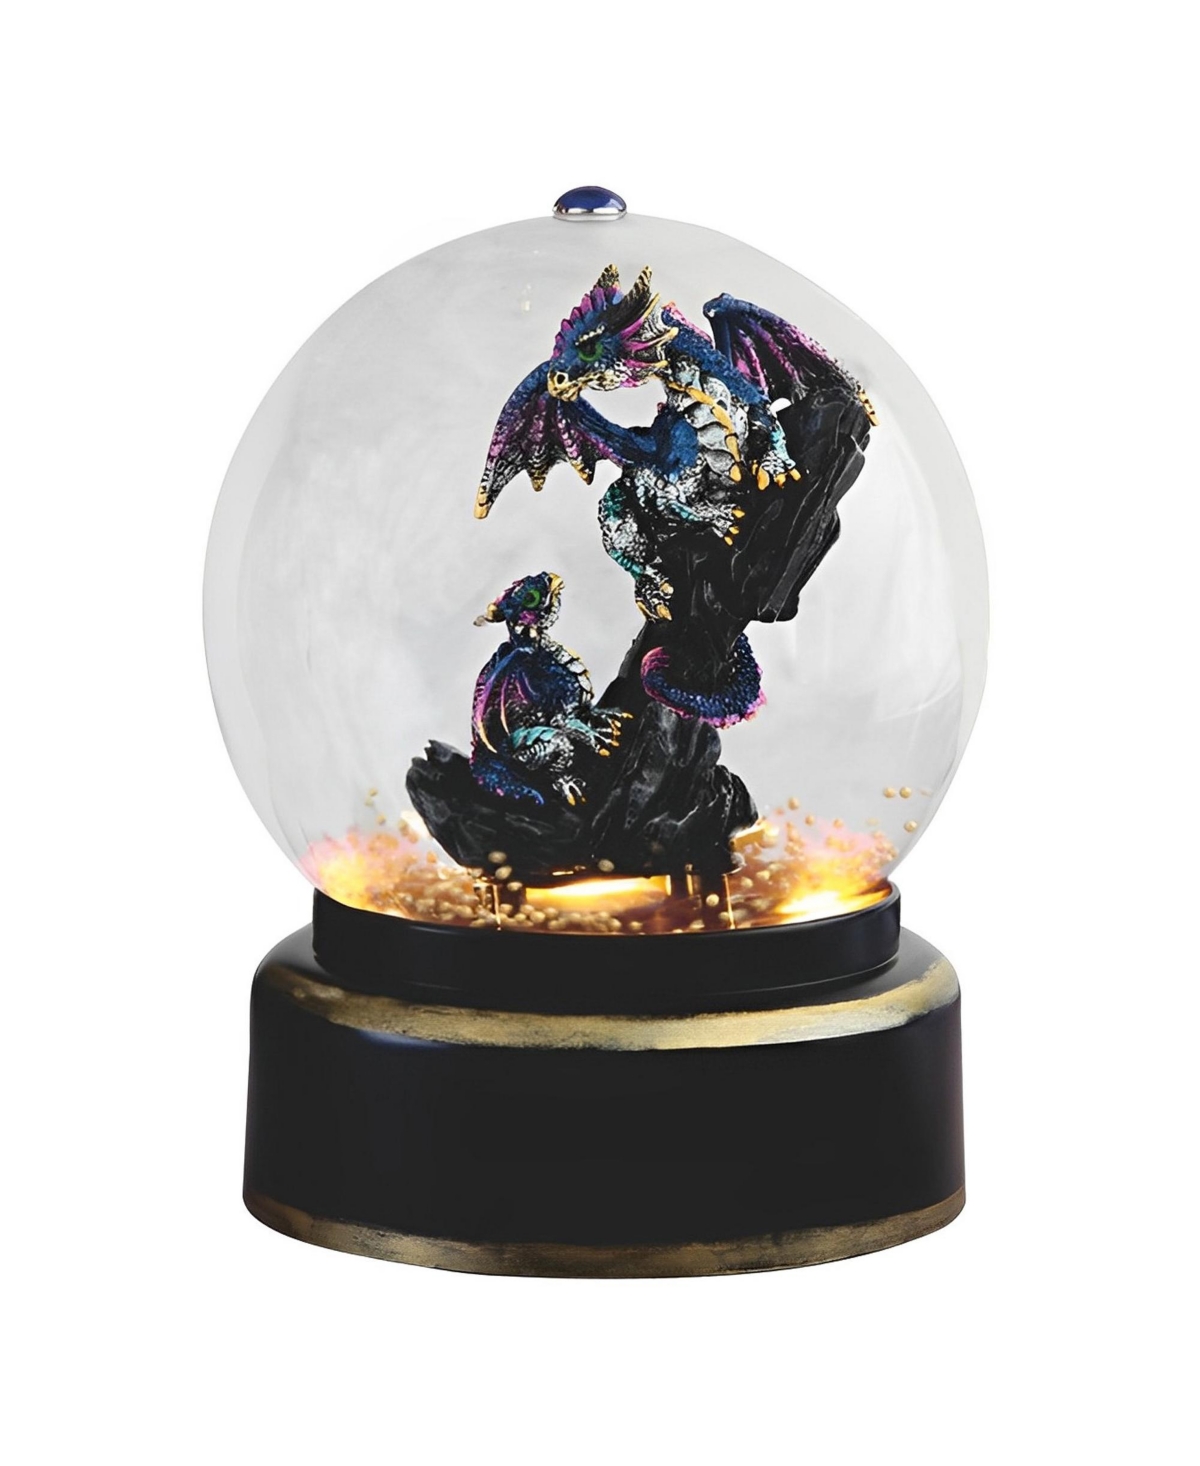 7.5"H Blue Dragon in Air Powered Snow Globe Home Decor Perfect Gift for House Warming, Holidays and Birthdays - Multicolor